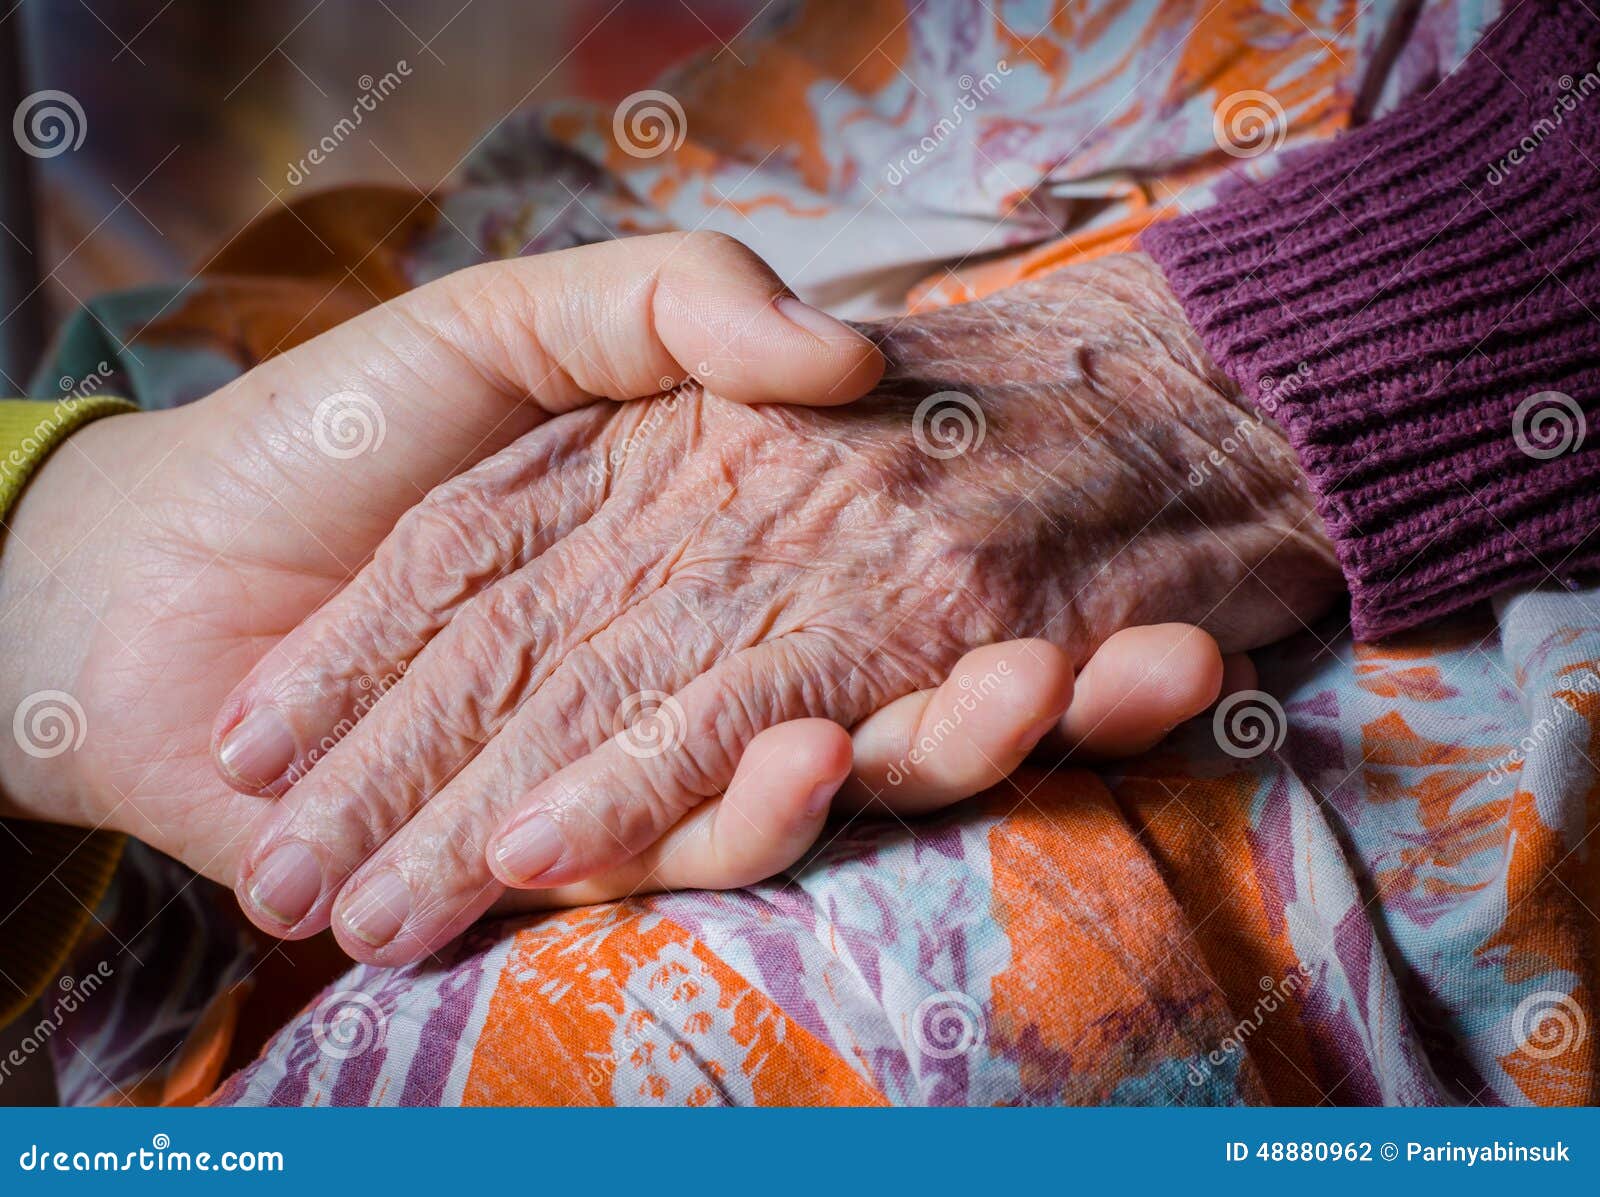 young girl's hand touches and holds an old woman hand